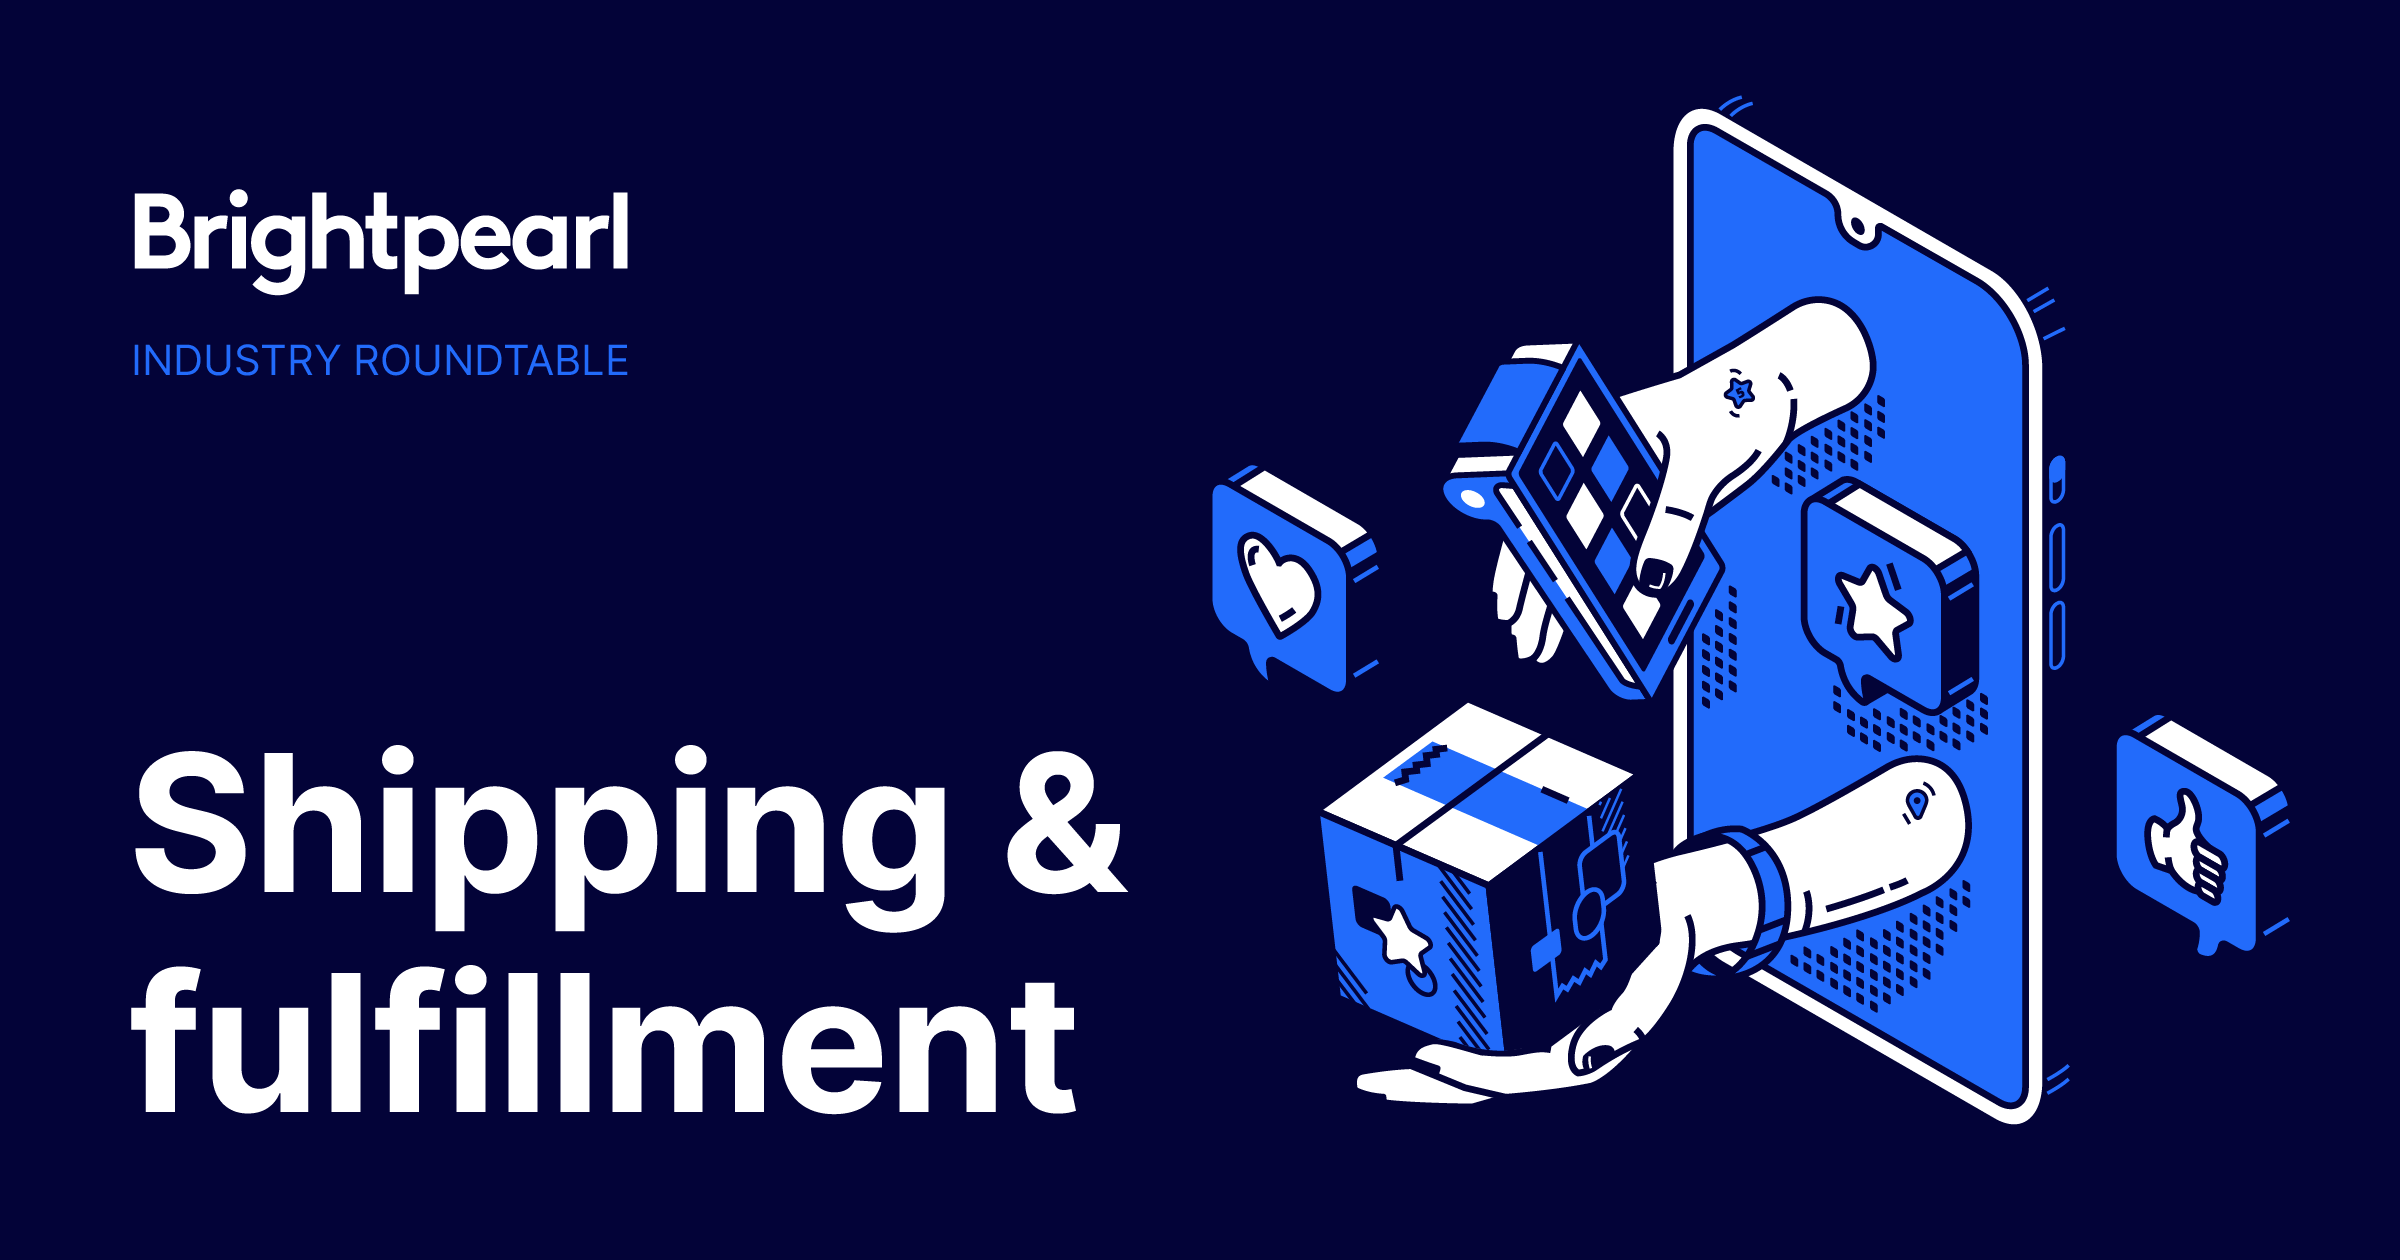 Brightpearl Industry Roundtable - Shipping and Fulfillment